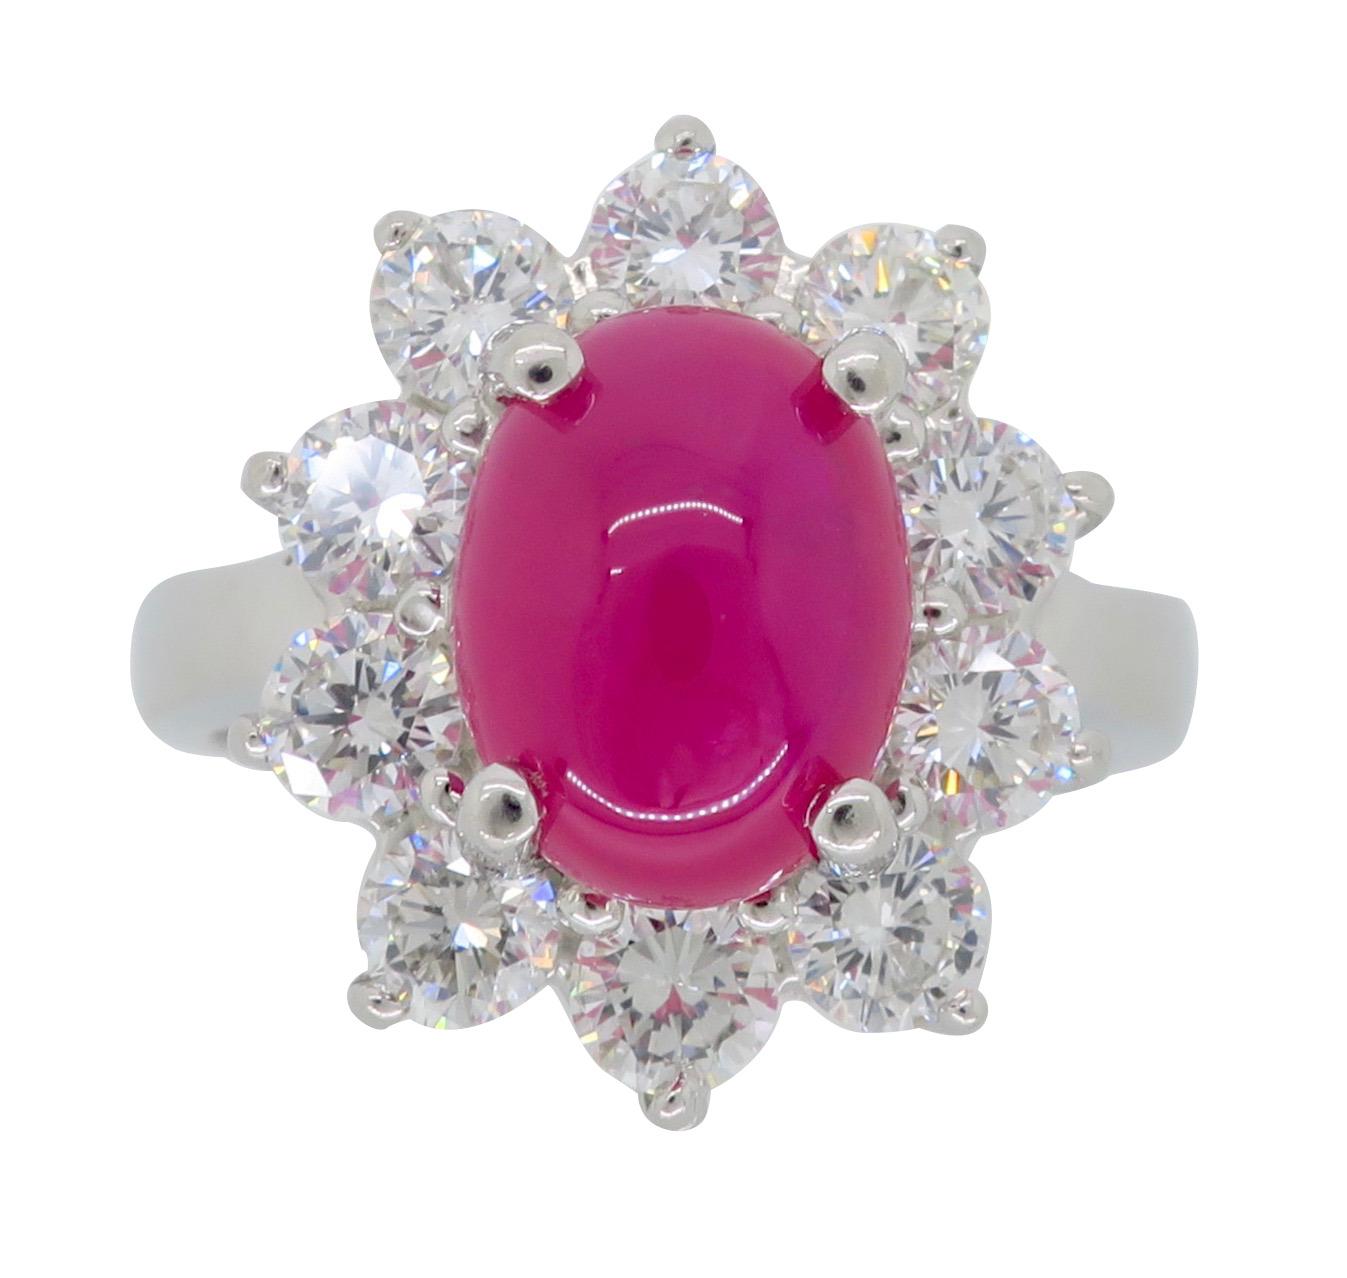 Cabochon Burma Ruby and Diamond Halo Ring in Platinum 6